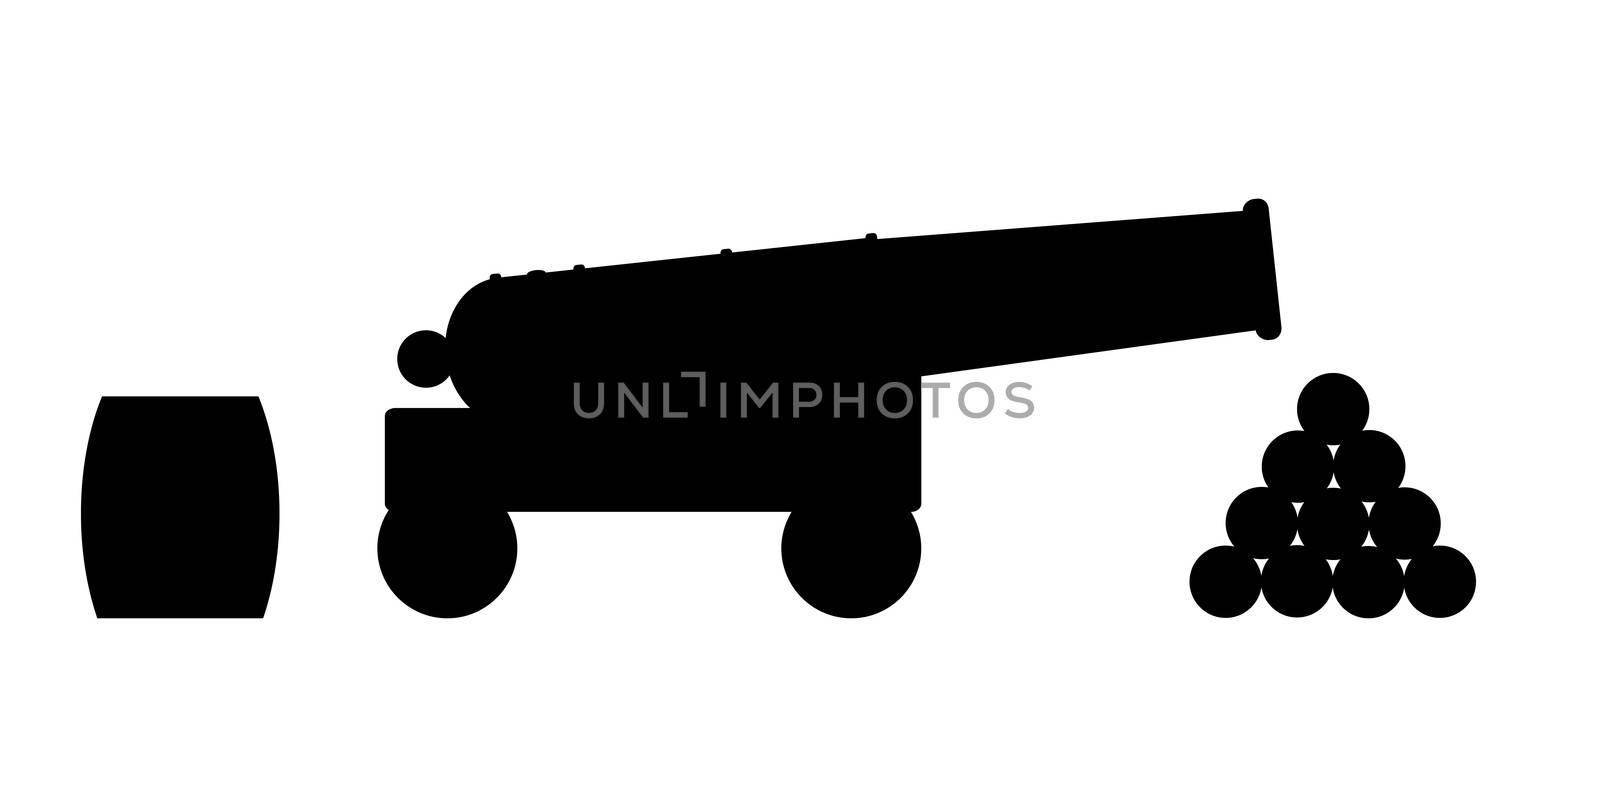 A depiction of an old ship of the lines cannon with powder and shot